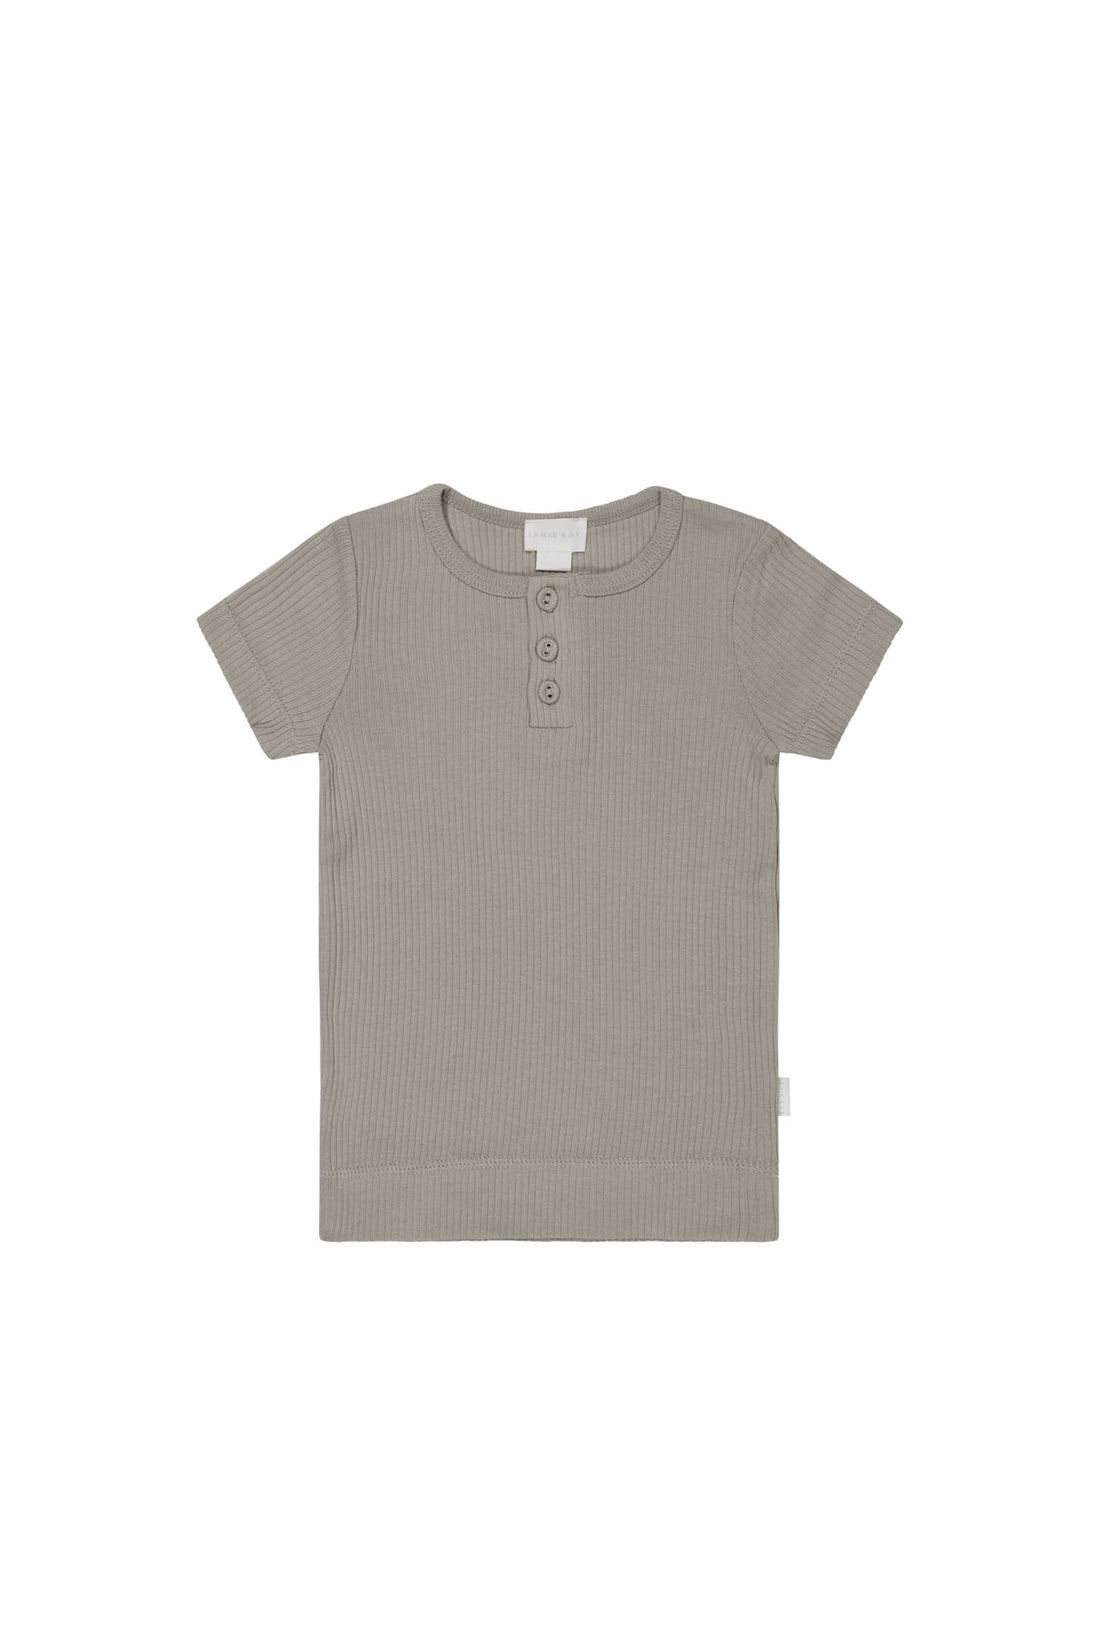 Organic Cotton Modal Henley Tee - Milford Childrens Top from Jamie Kay NZ